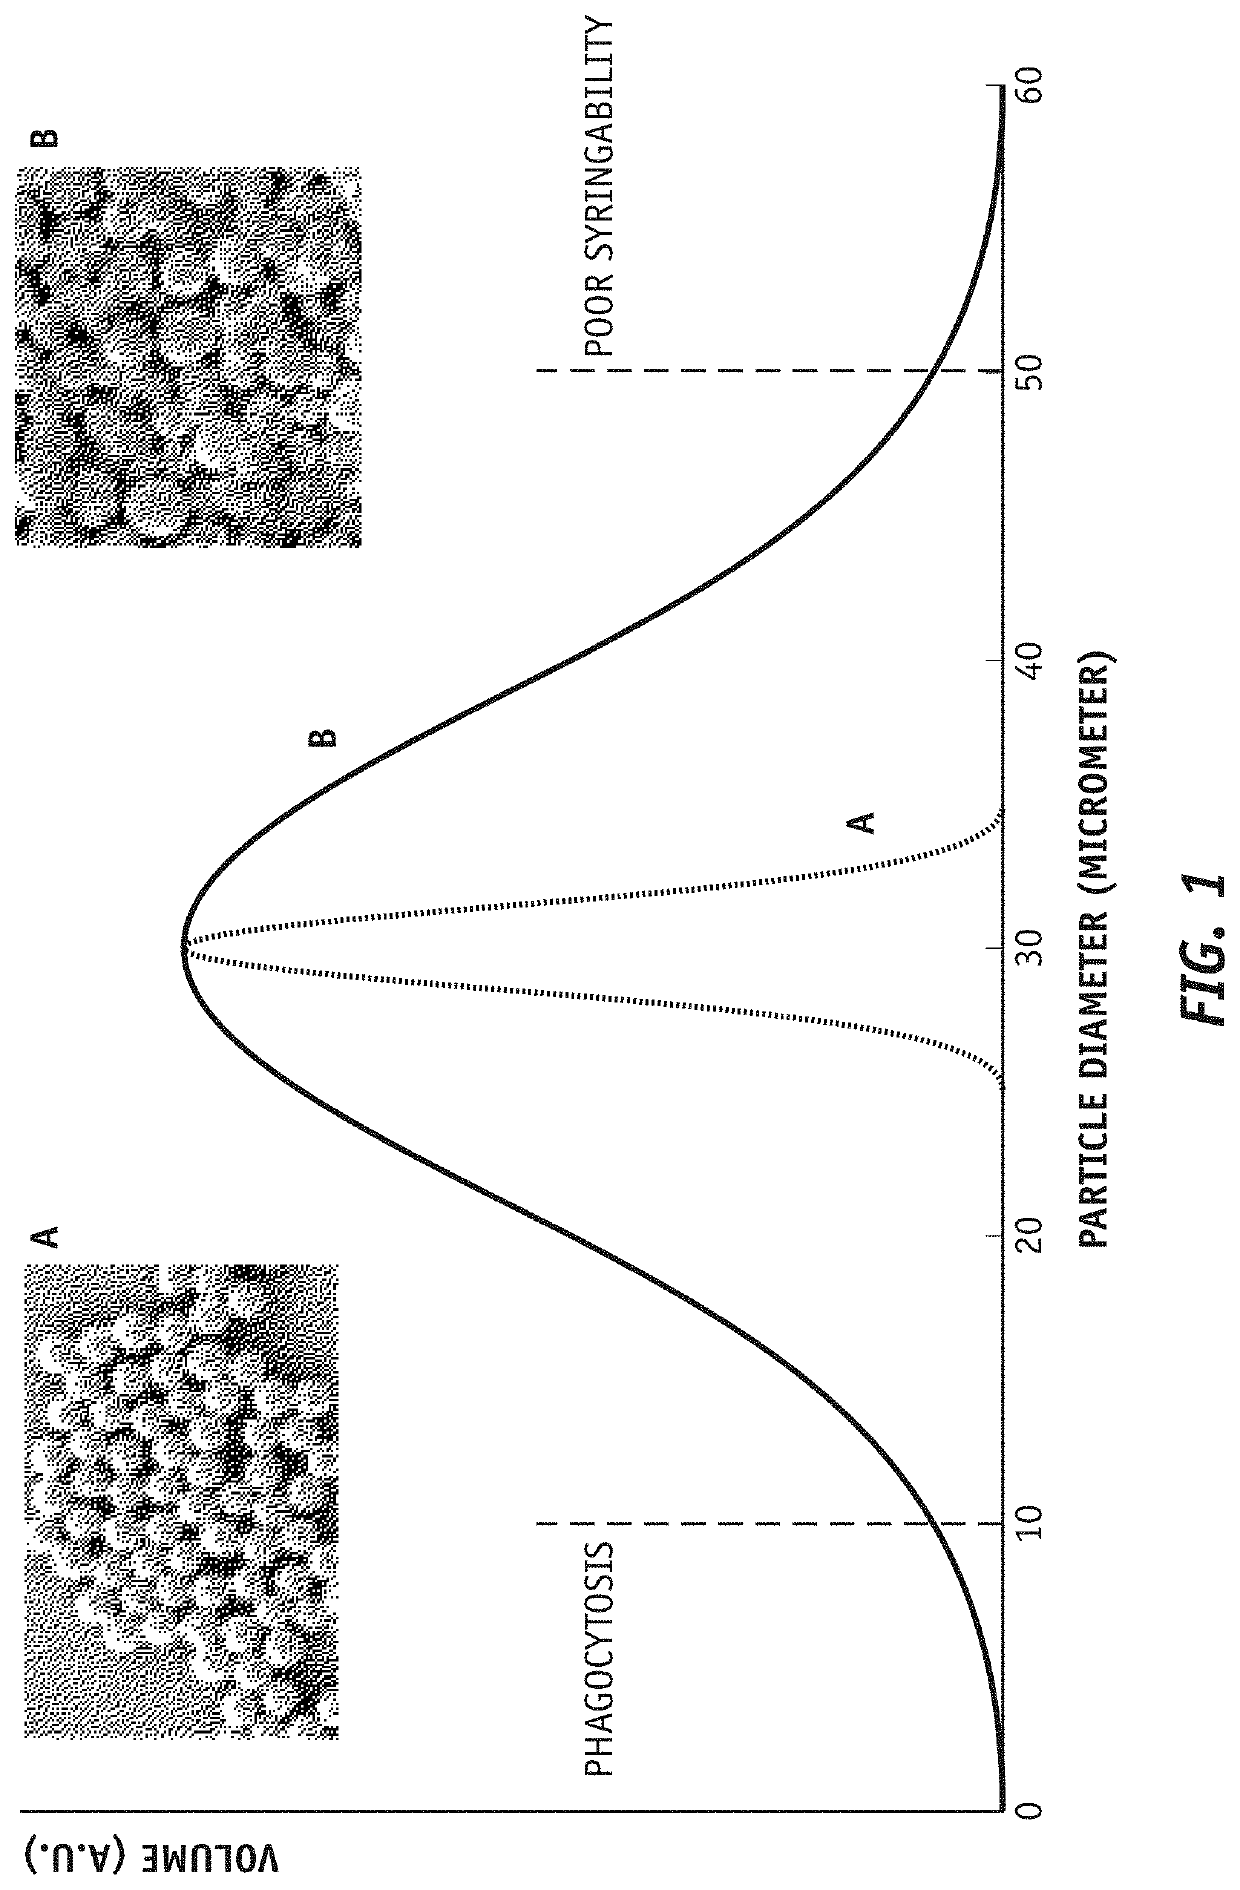 Sustained release trepostinil-compound microparticle compositions